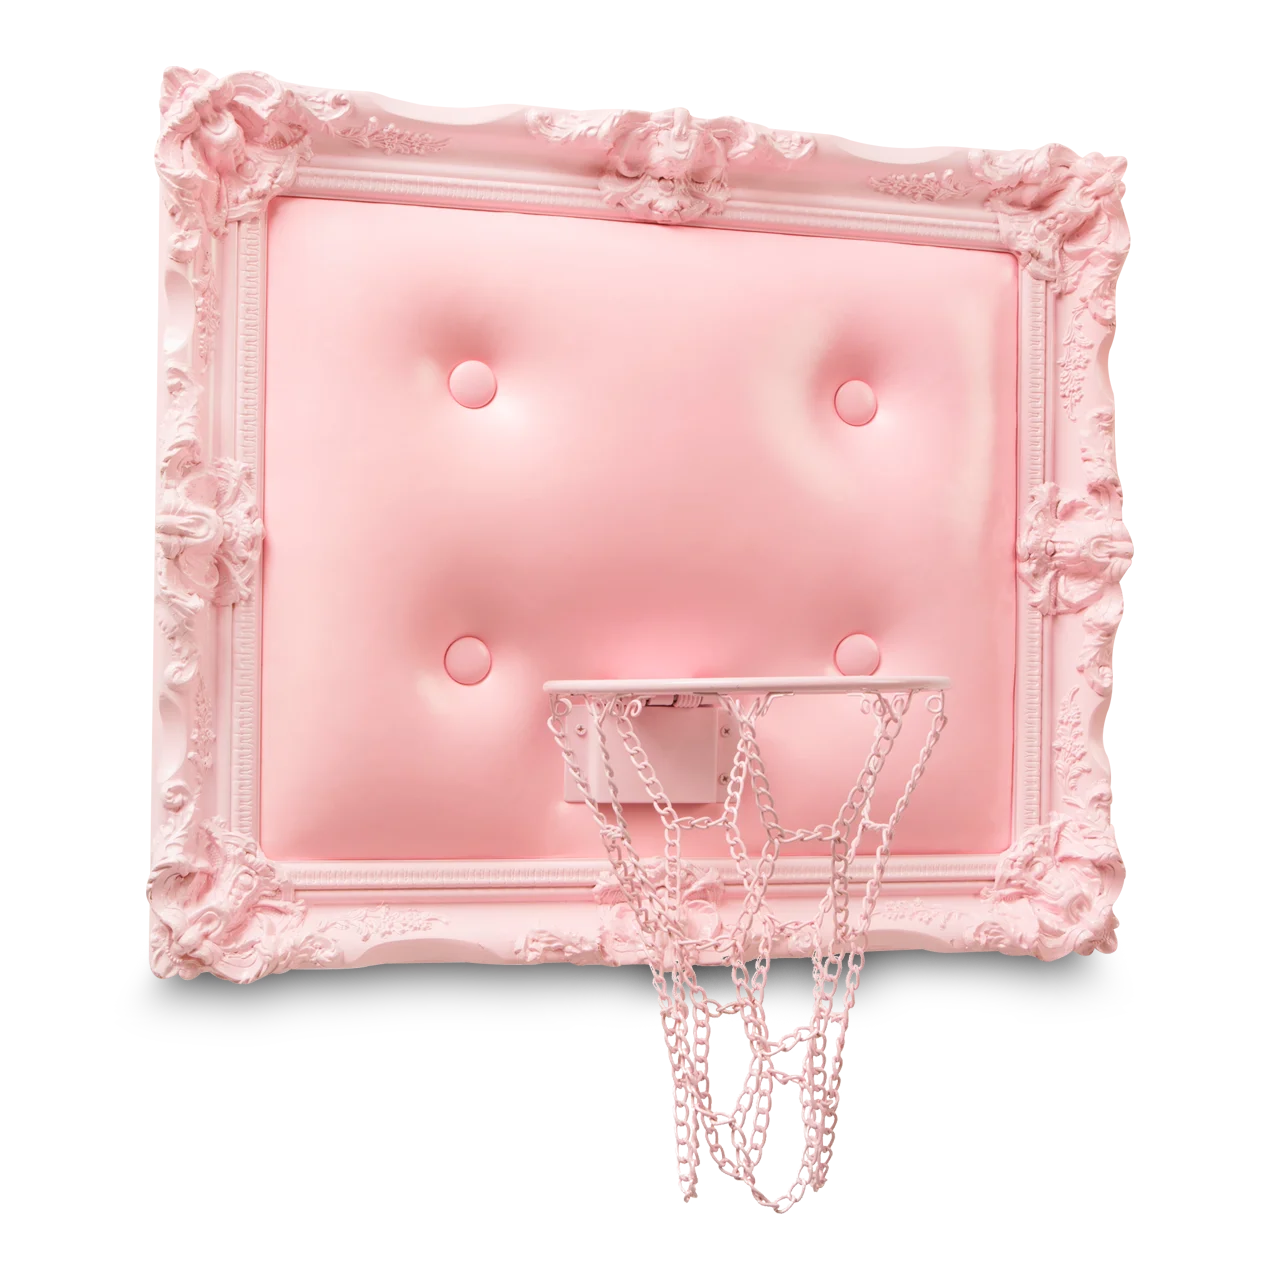 An ornate frame encapsulates a pink leather hoop.